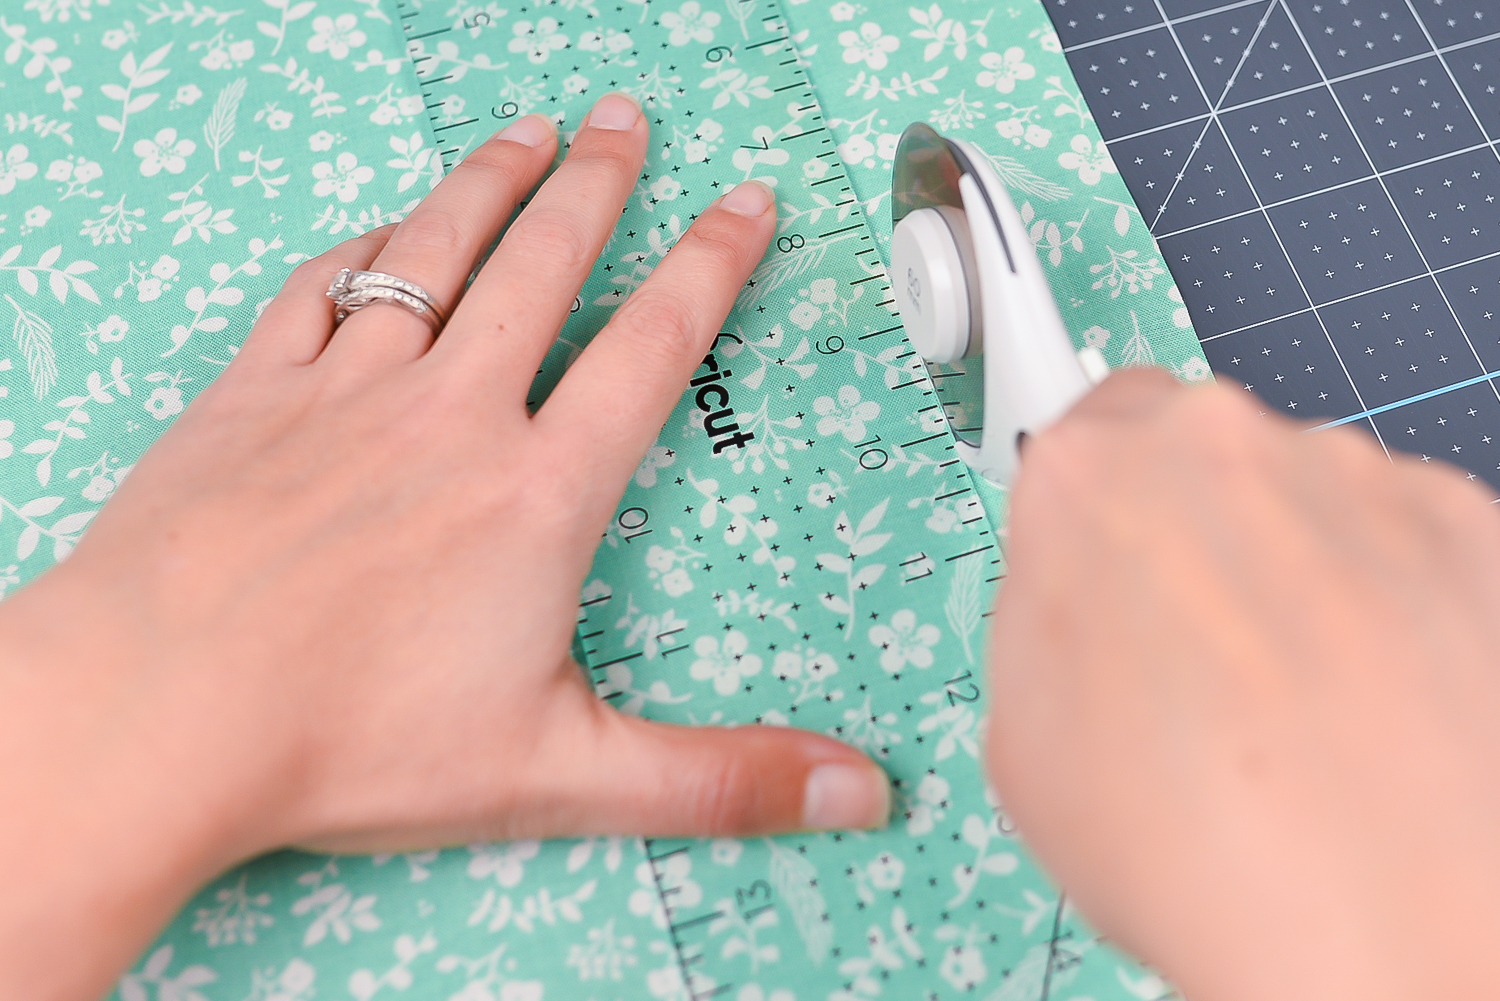 All About the Cricut Hand Tools - Hey, Let's Make Stuff